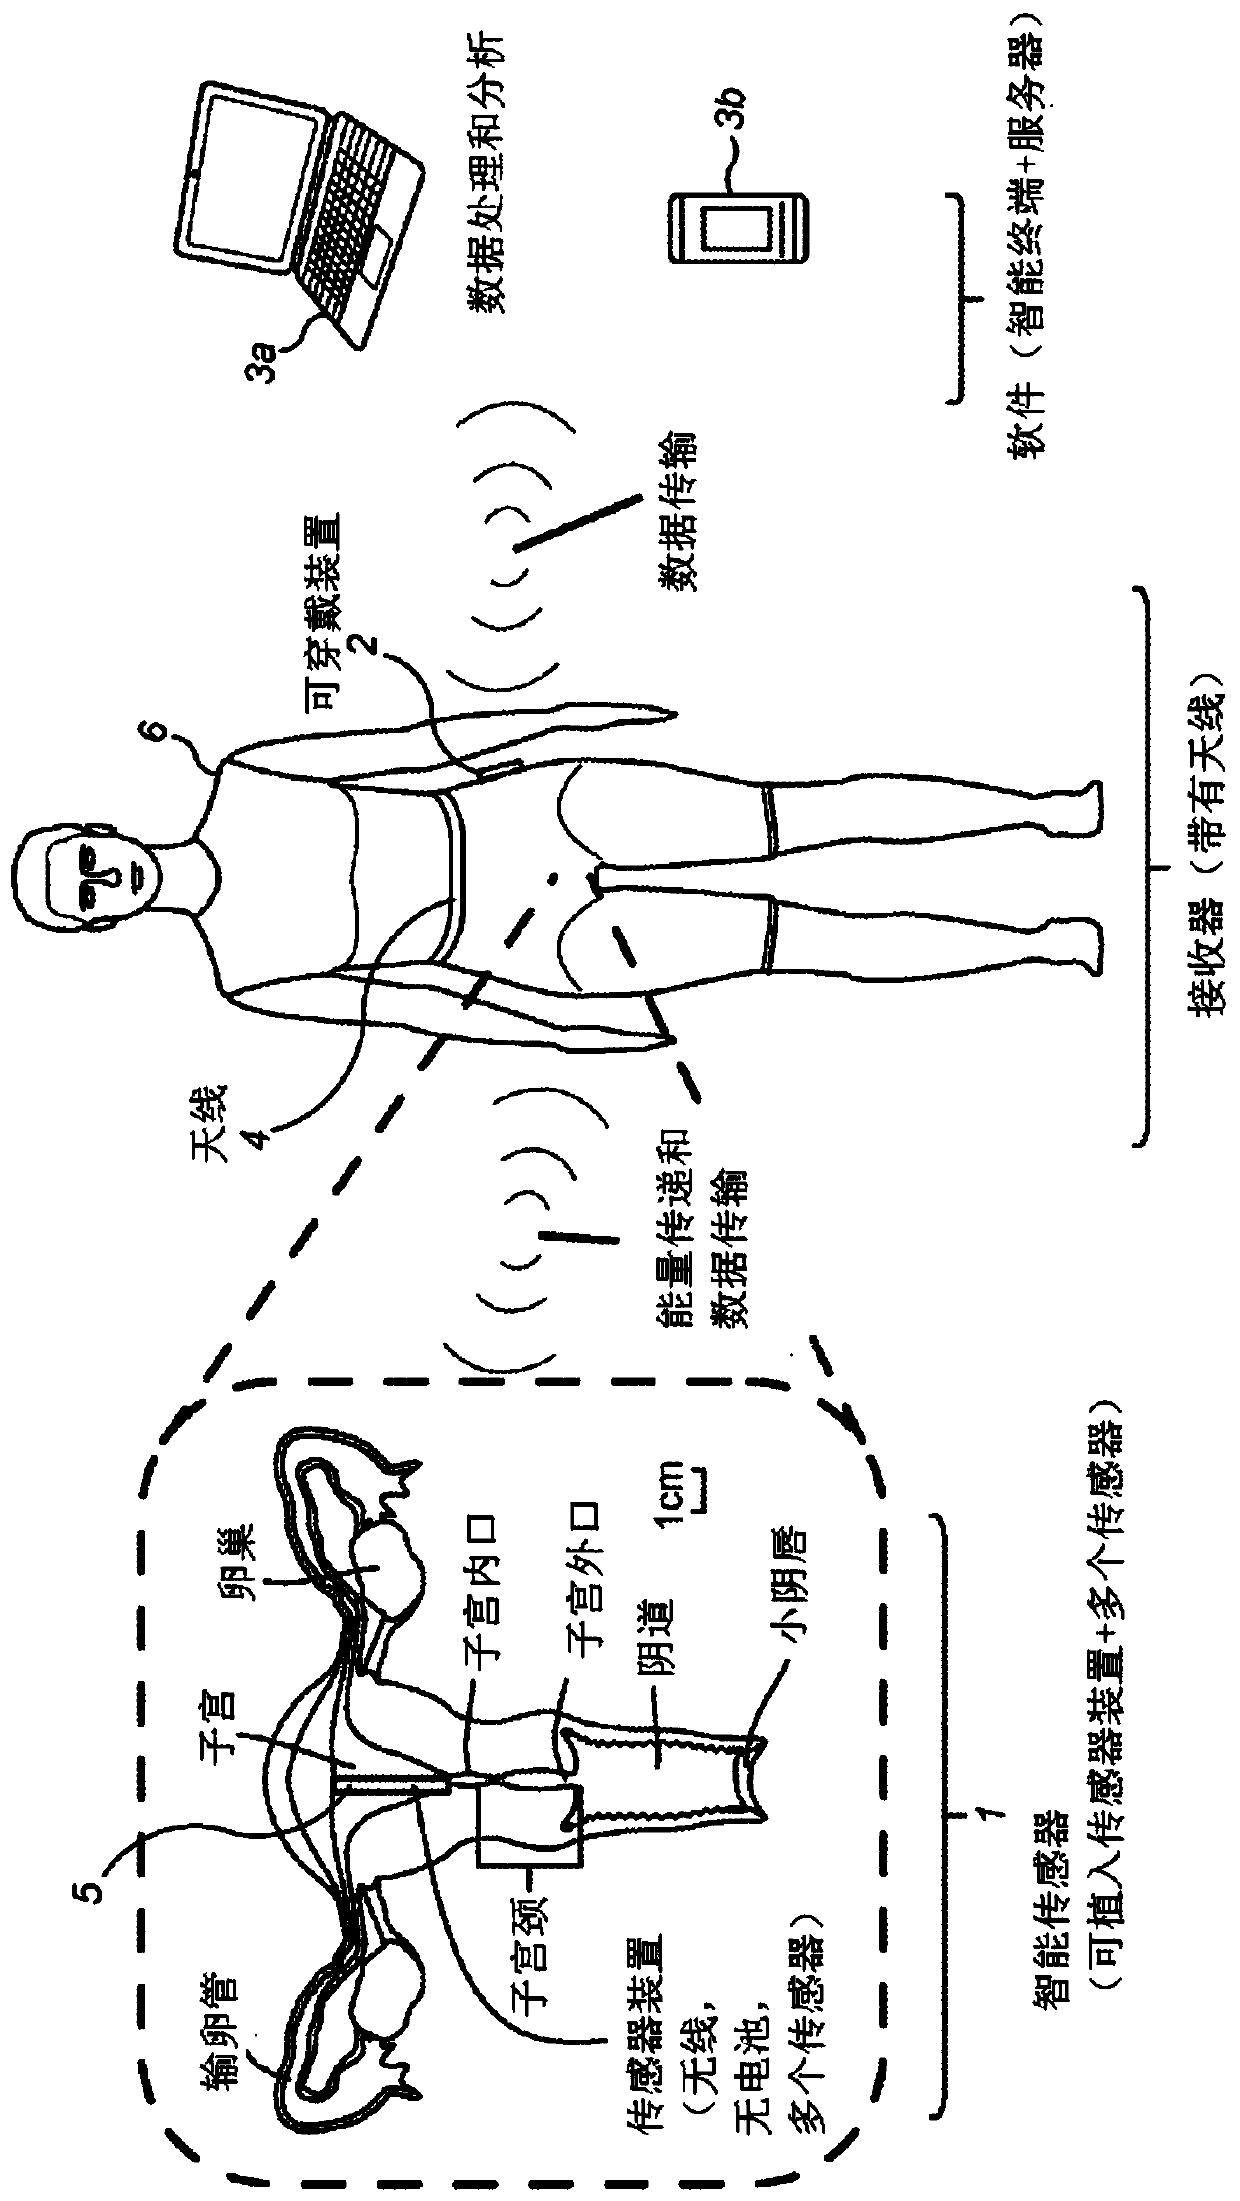 Wearable antenna and intra-uterine monitoring system